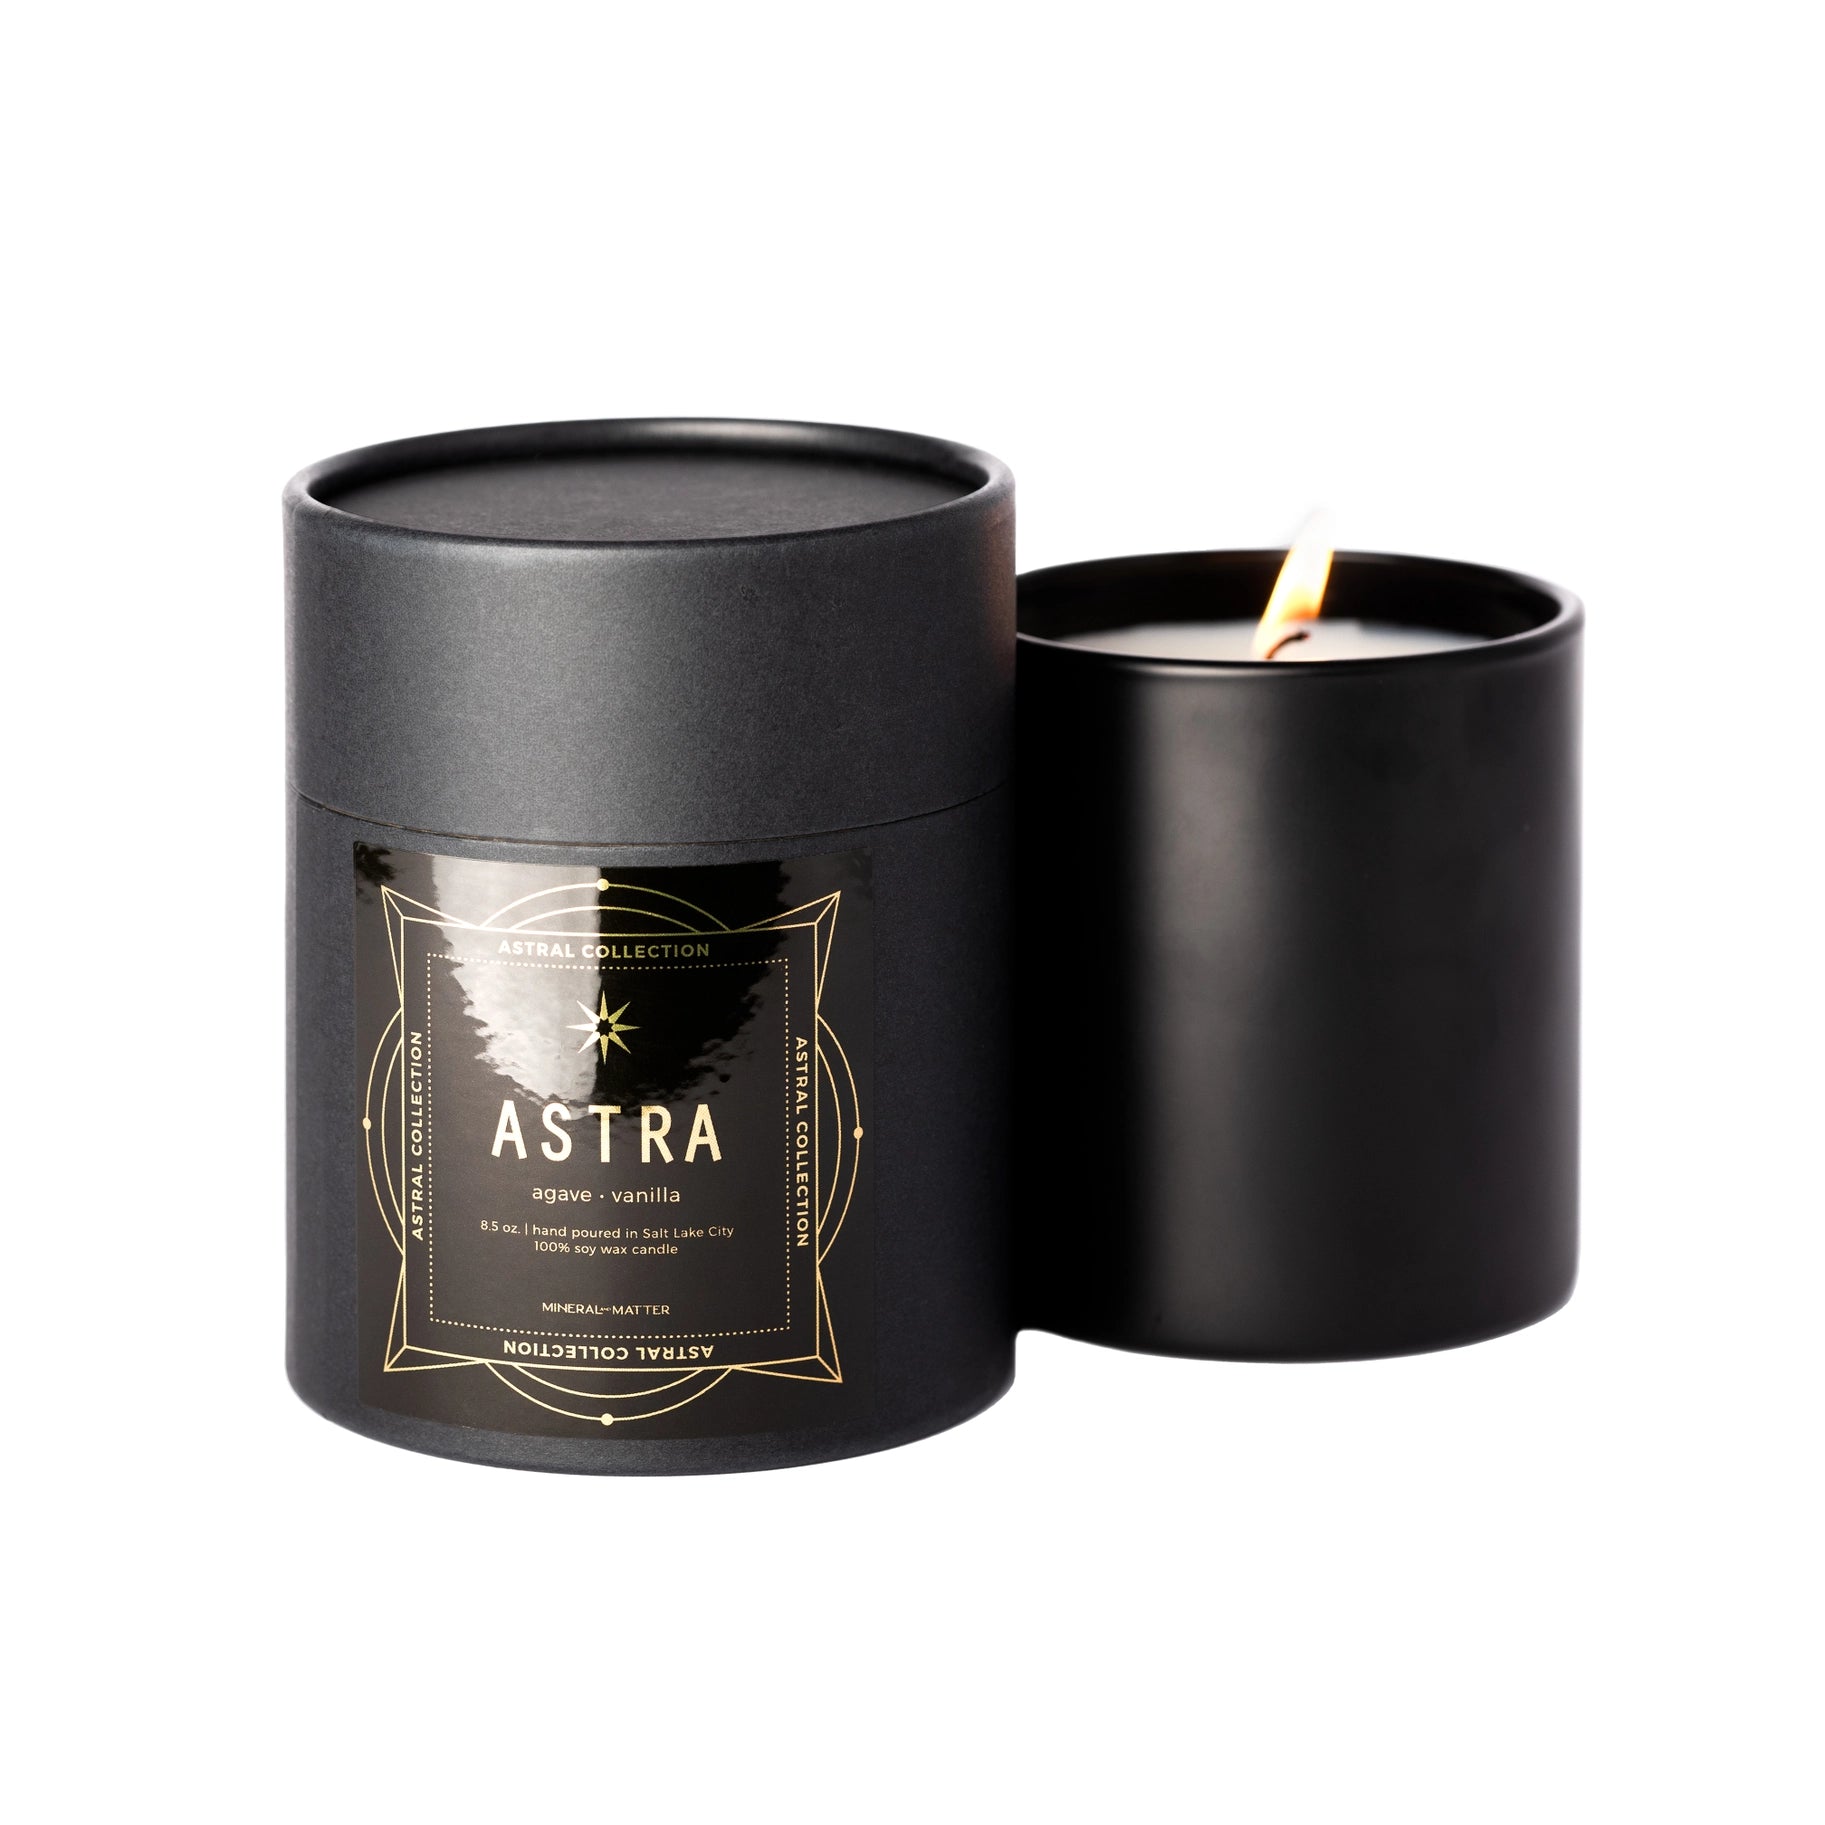 Astra Astral Candle